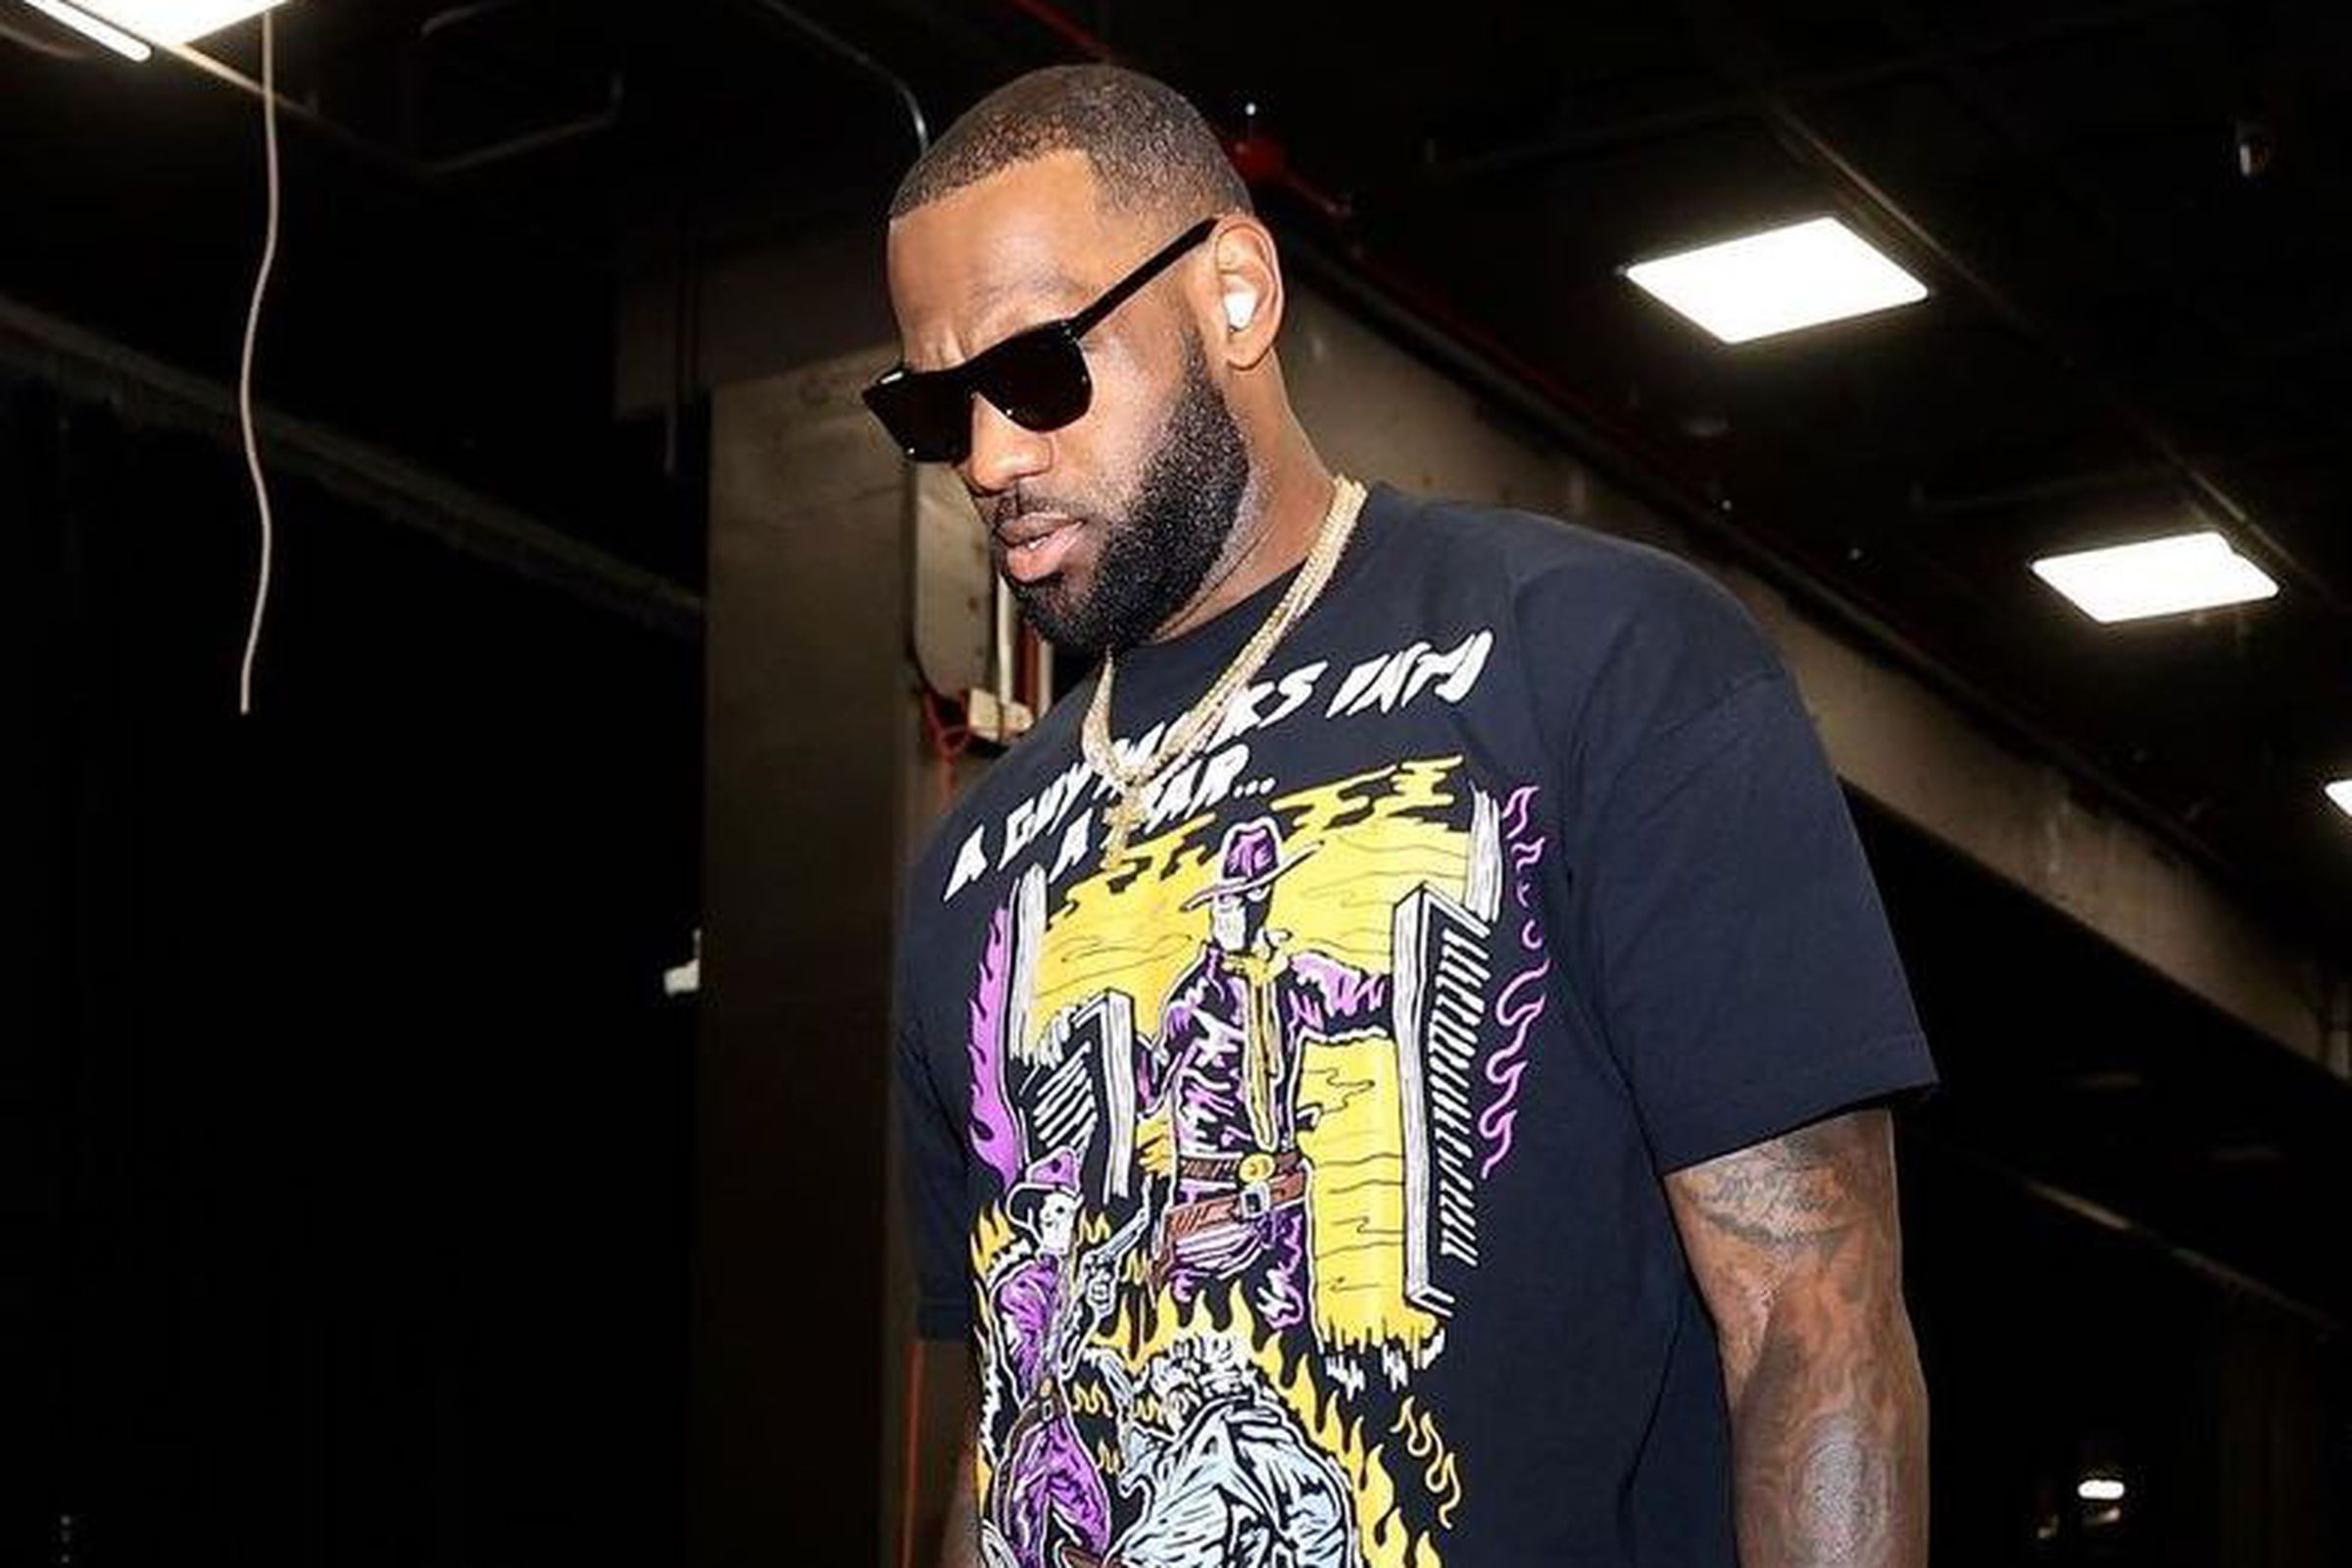 LeBron James wearing what appear to be Beats Studio Buds.